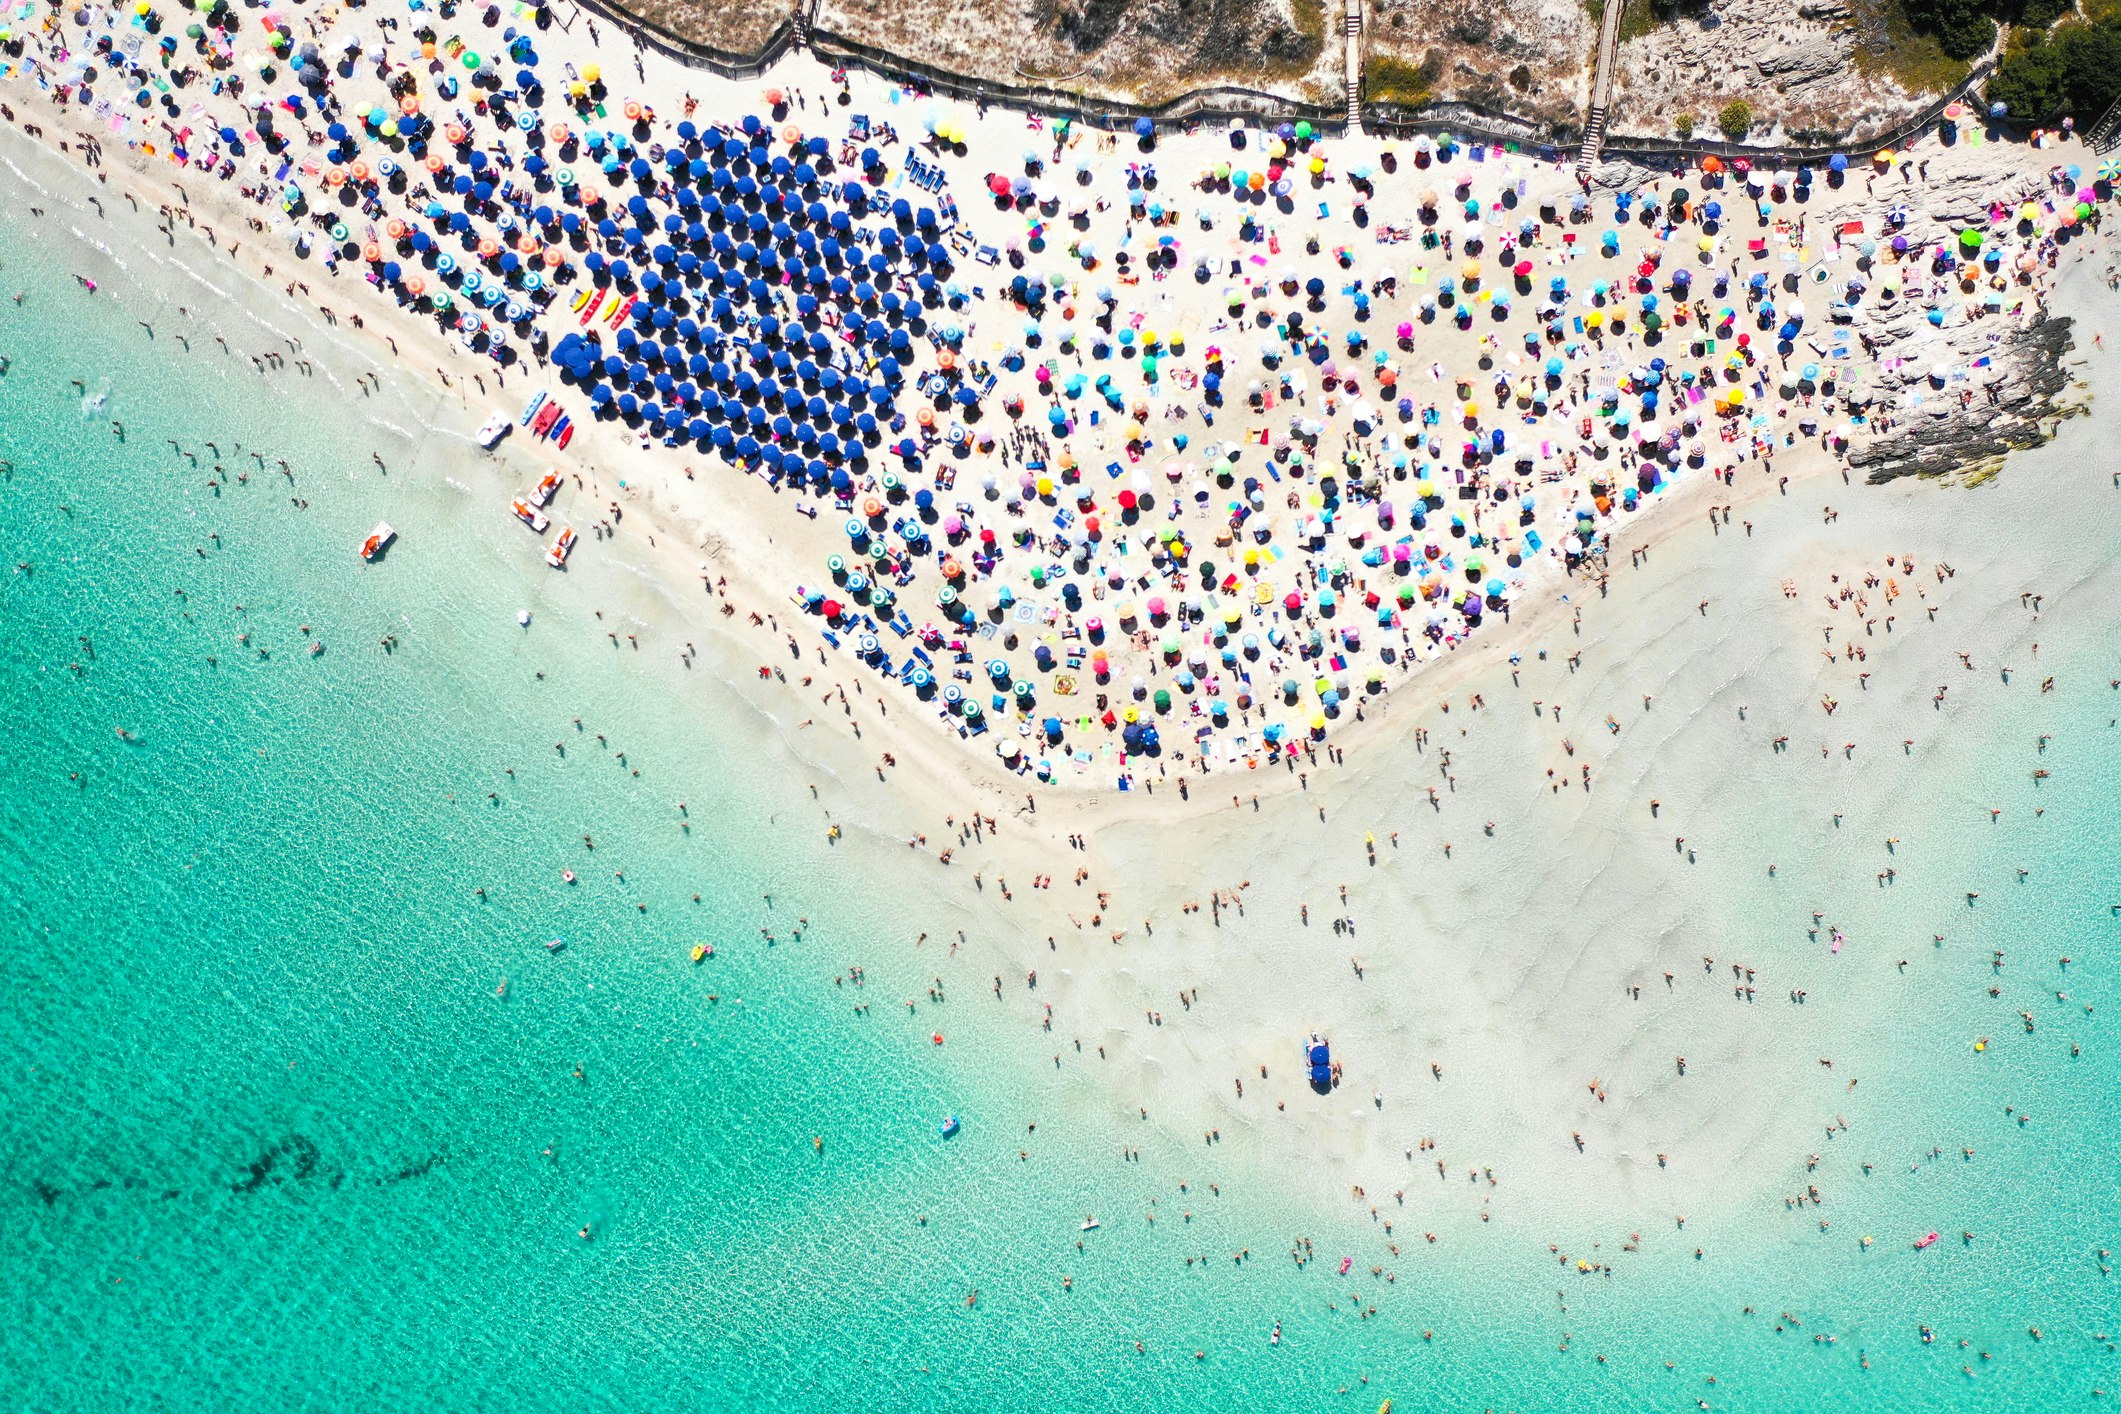 Bird's eye view of Spiaggia Della Pelosa packed with beach towels and umbrellas